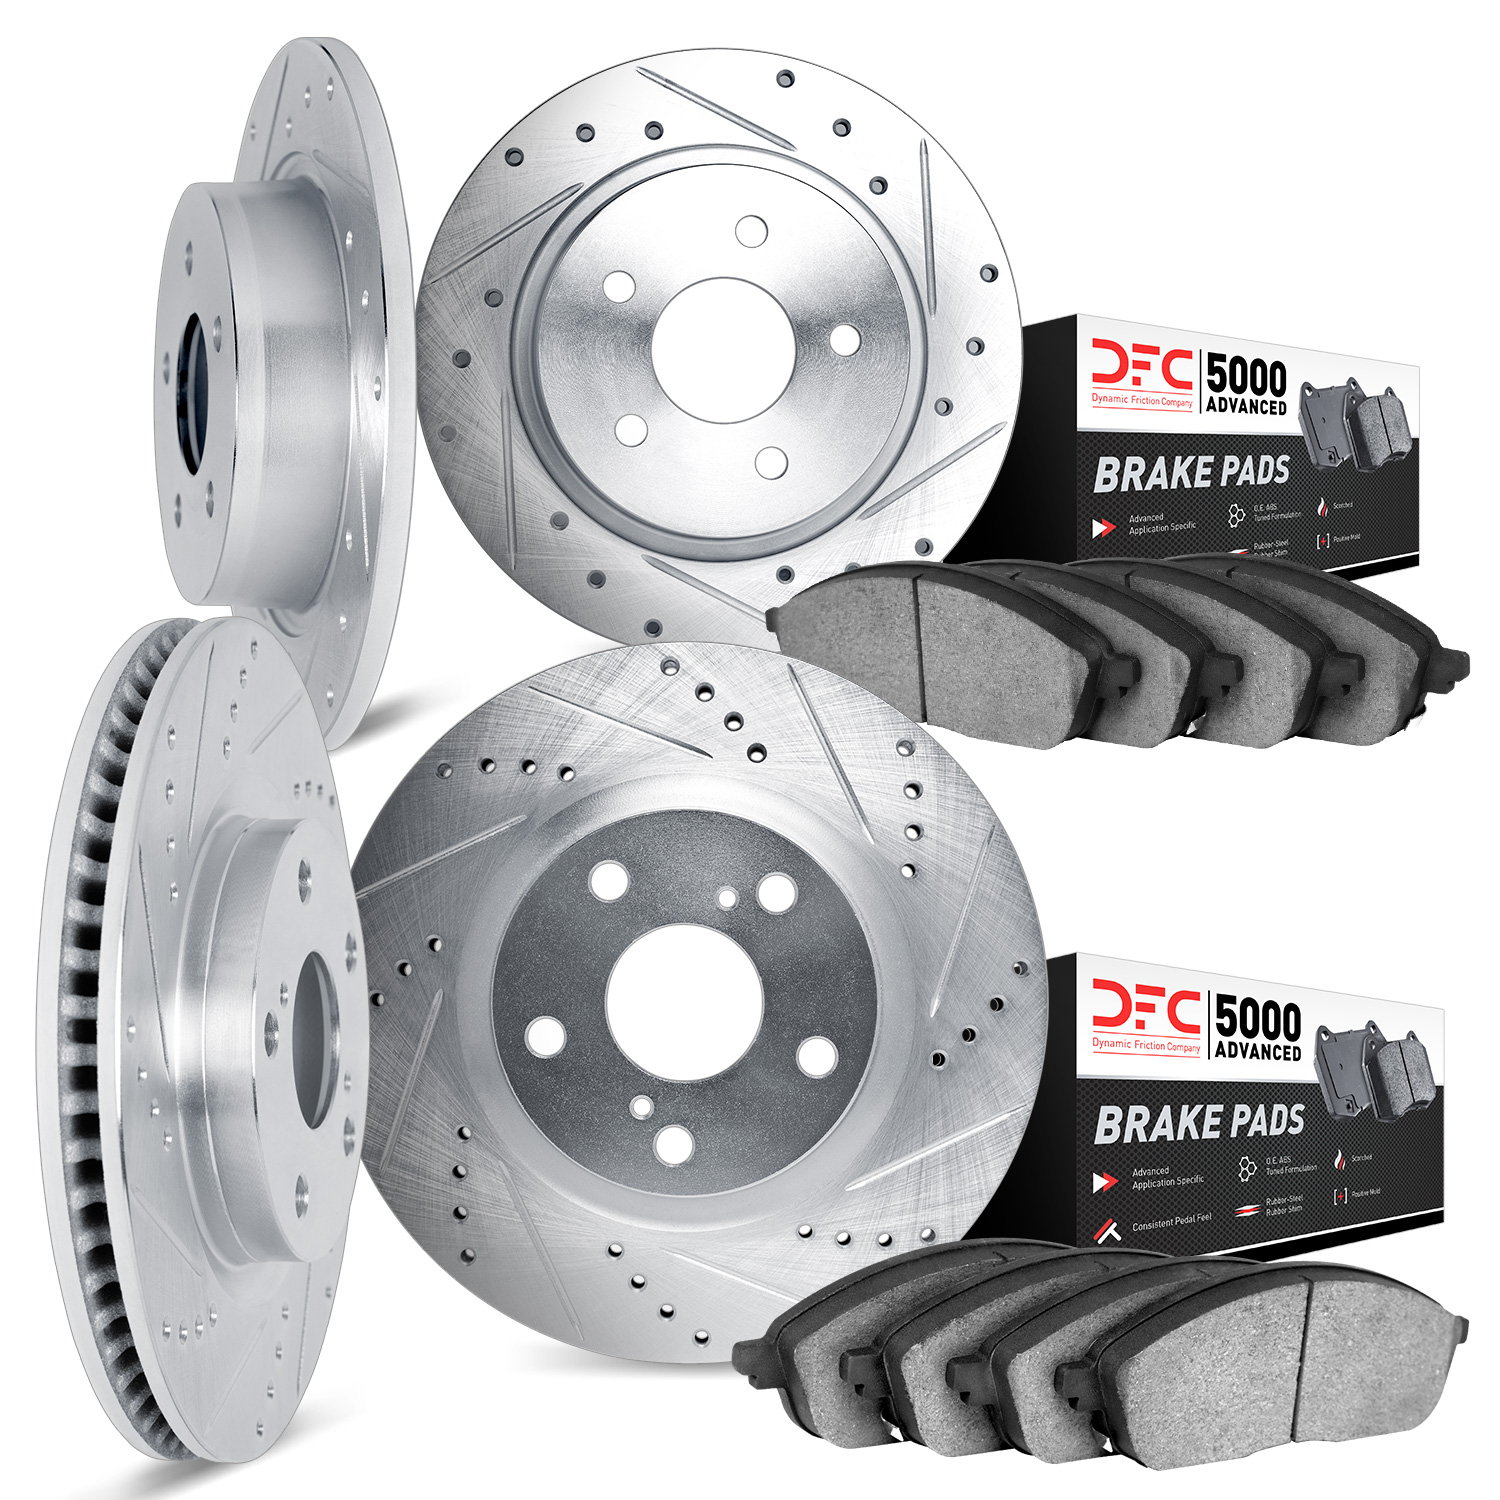 7504-67076 Drilled/Slotted Brake Rotors w/5000 Advanced Brake Pads Kit [Silver], 1987-1988 Infiniti/Nissan, Position: Front and